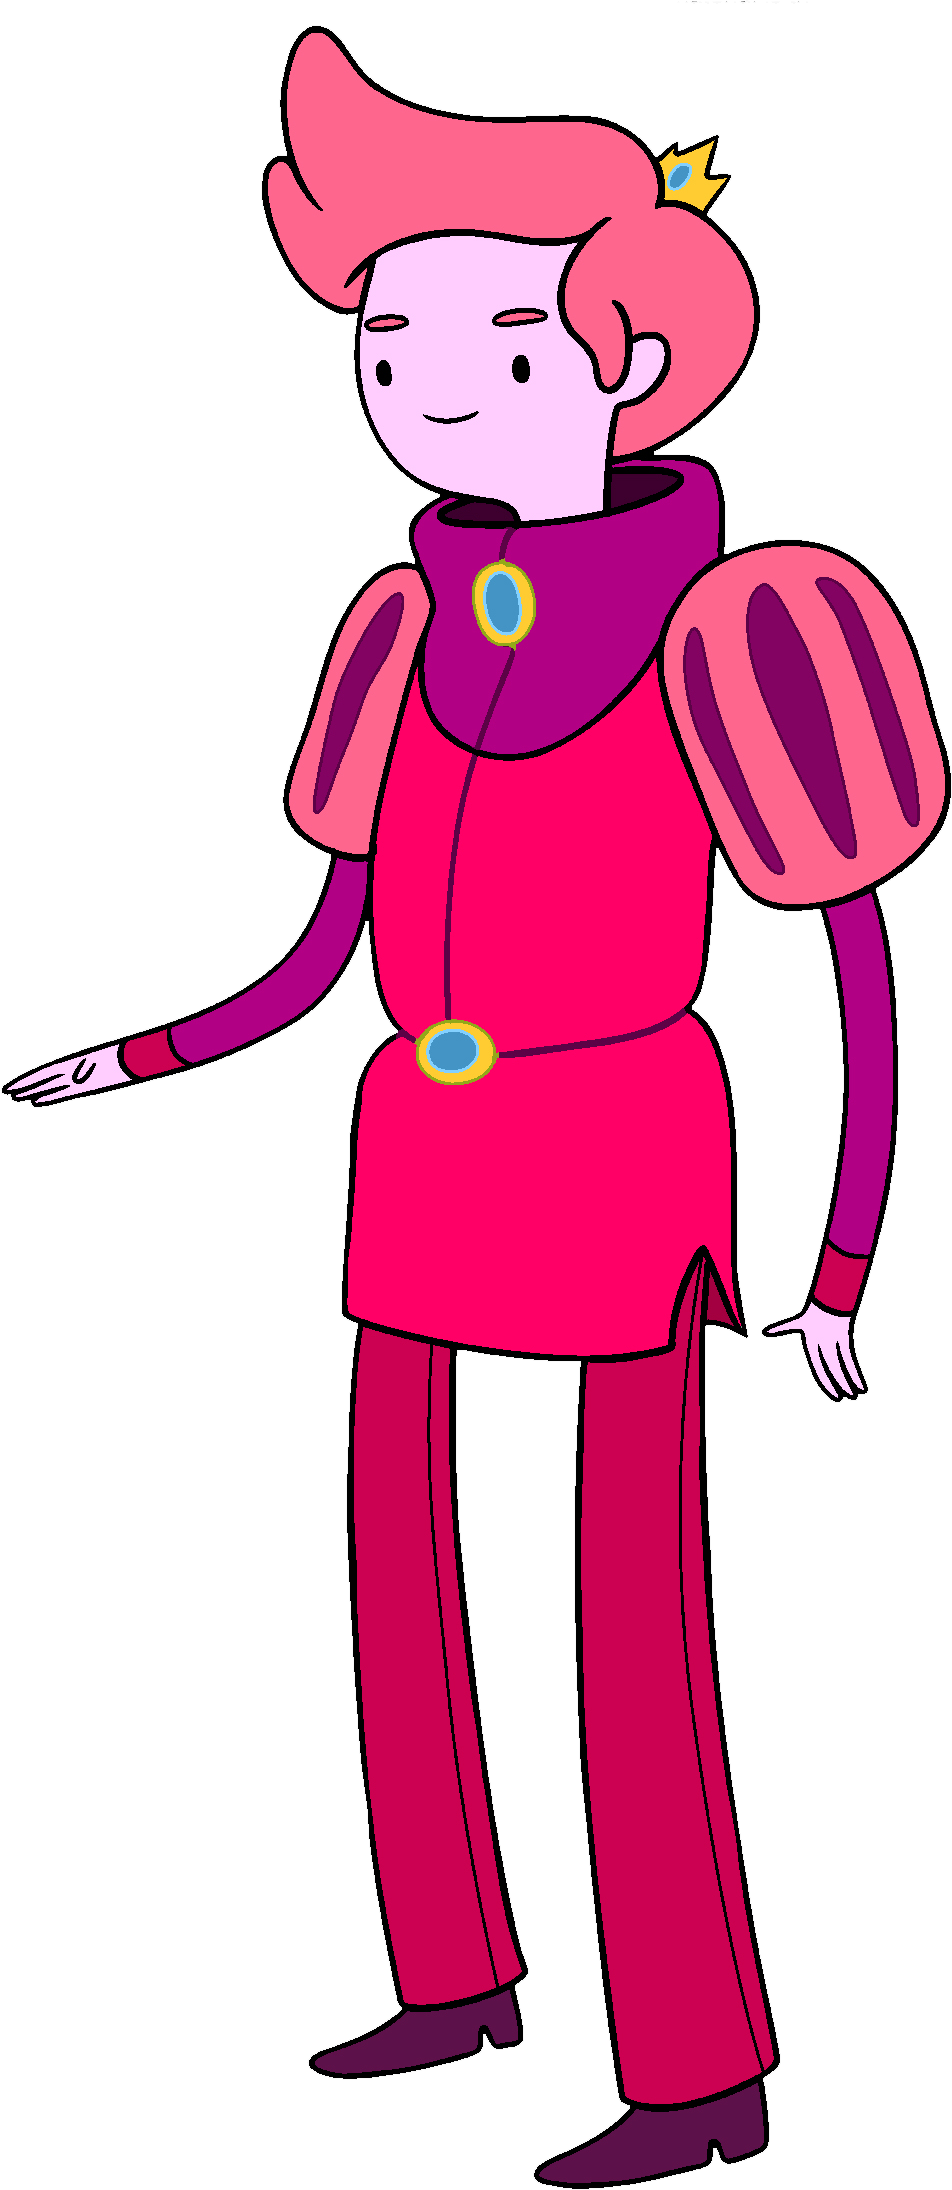 Prince Gumball | Adventure Time Wiki | FANDOM powered by Wikia